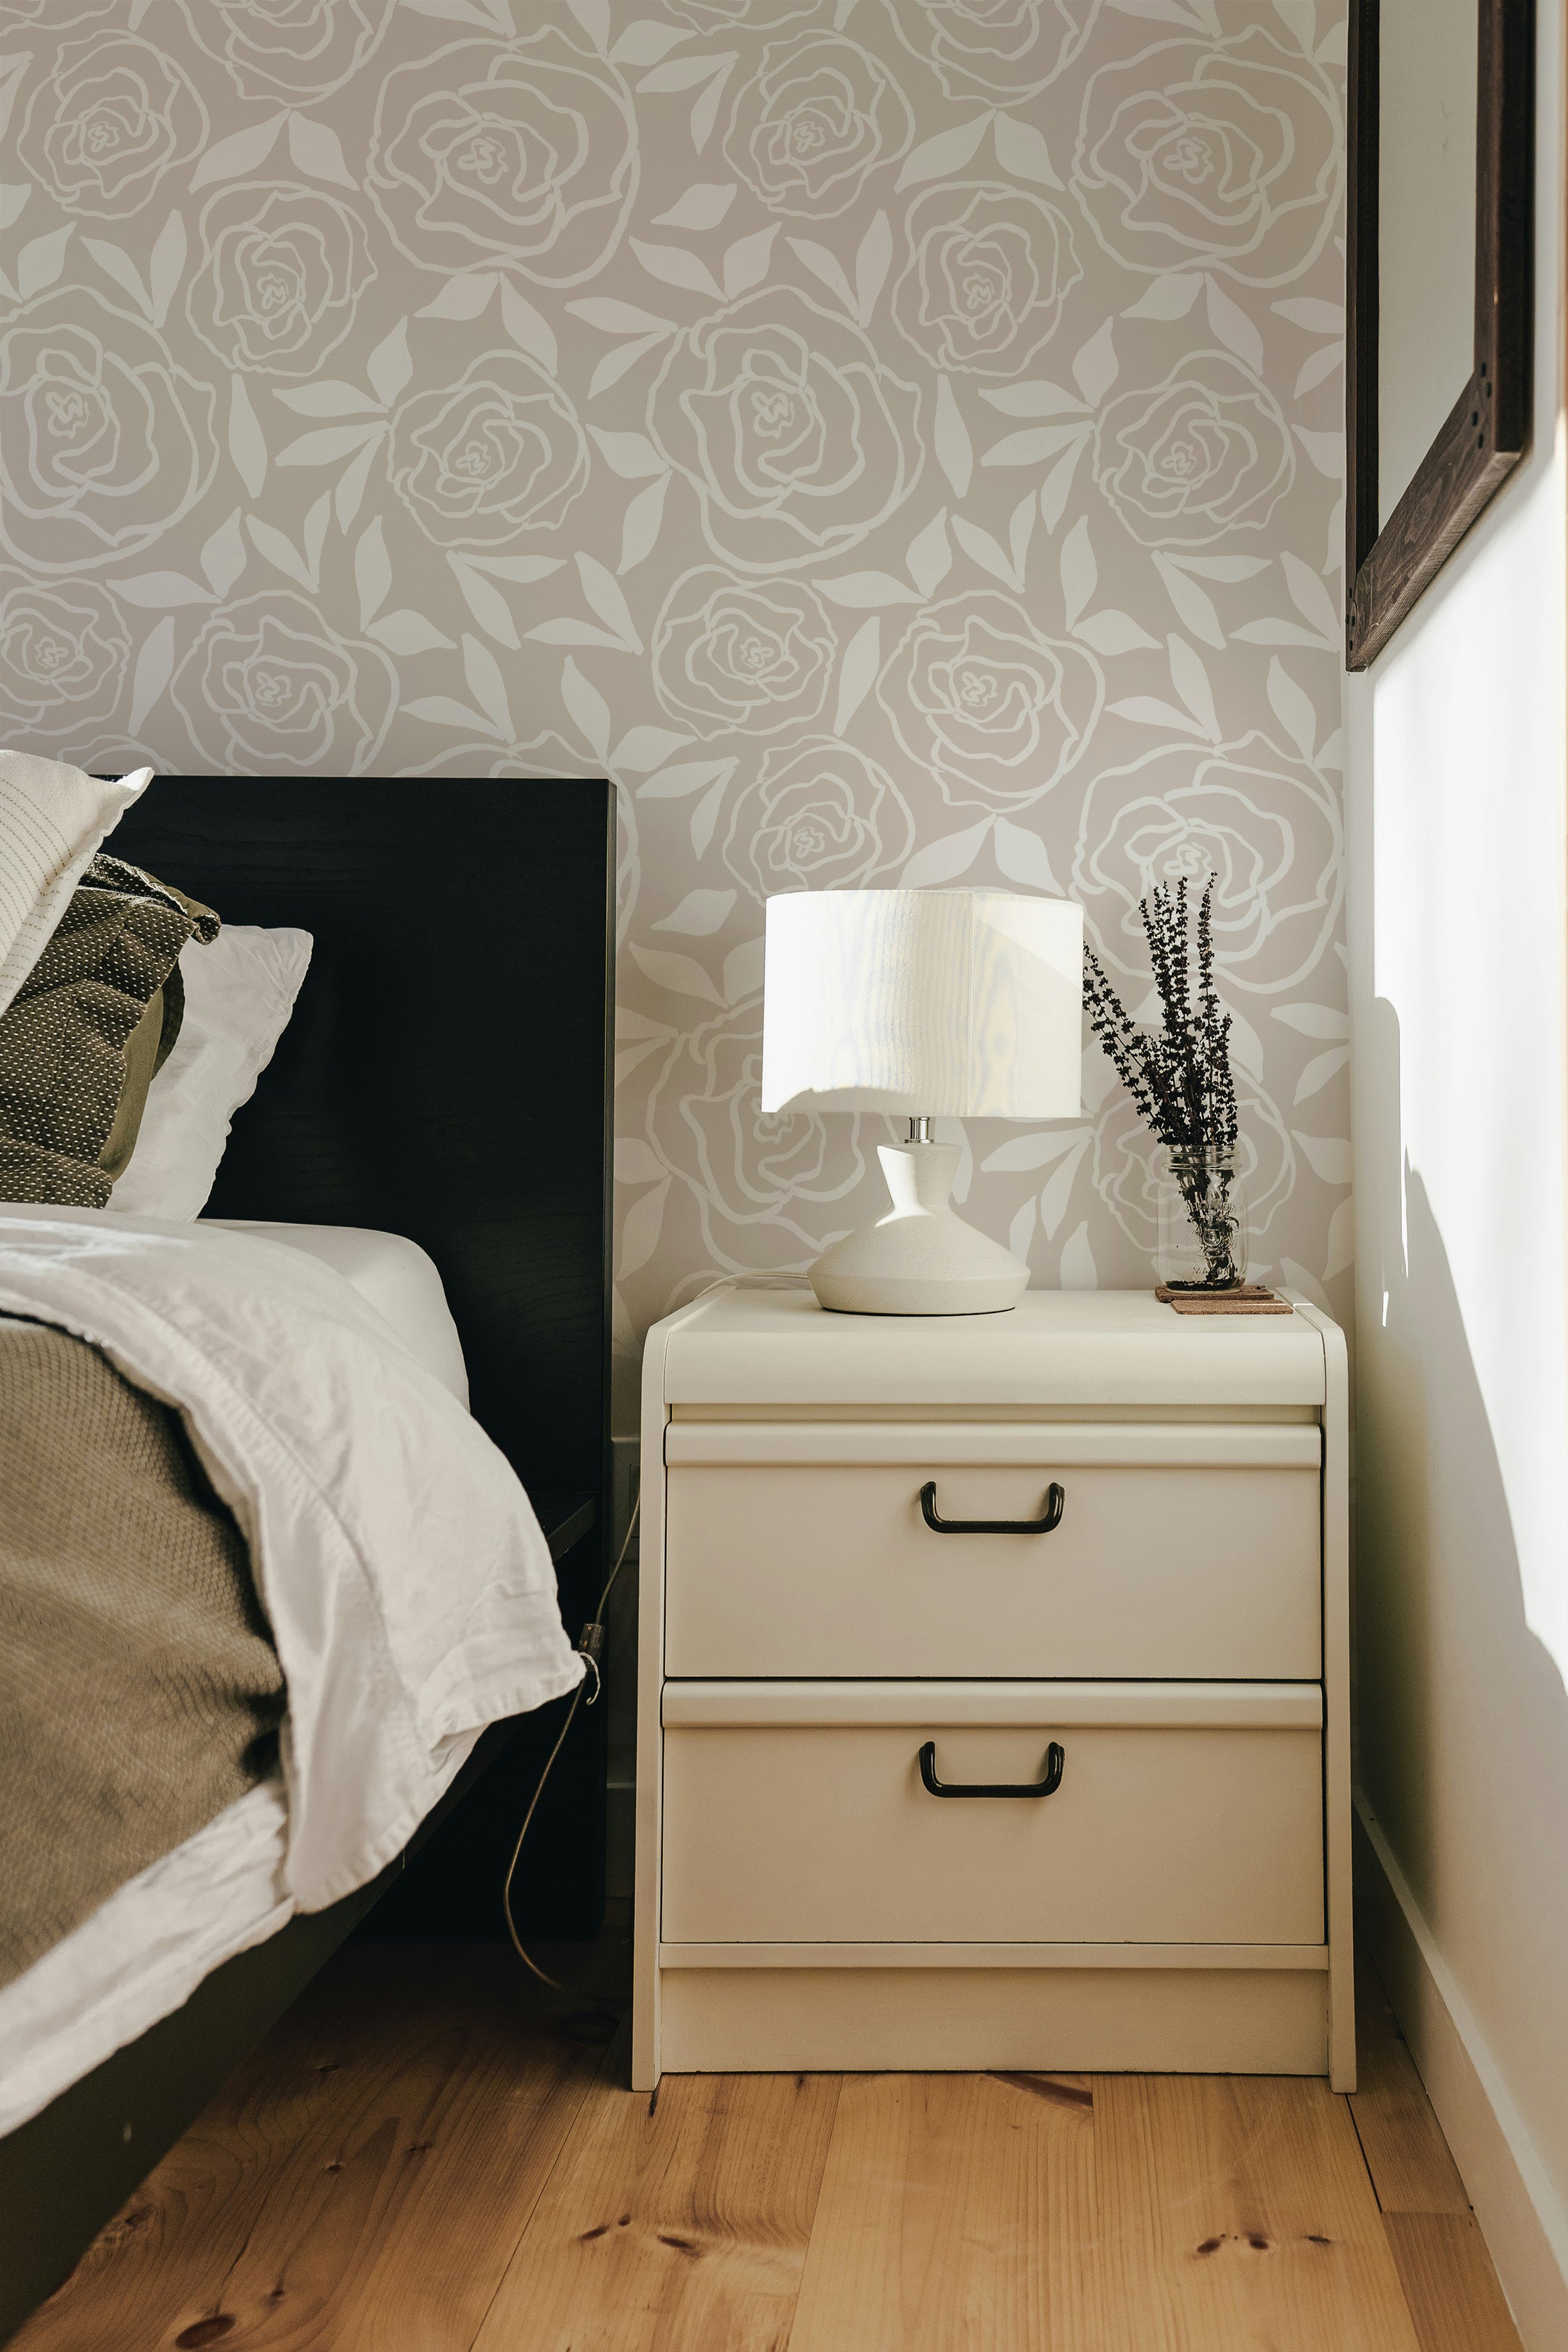 Charming bedroom scene with a rose-patterned wallpaper providing a serene backdrop. A bedside table with a white lamp and a decorative vase holding dried lavender next to a bed with linen bedding, creating a tranquil and elegant setting.